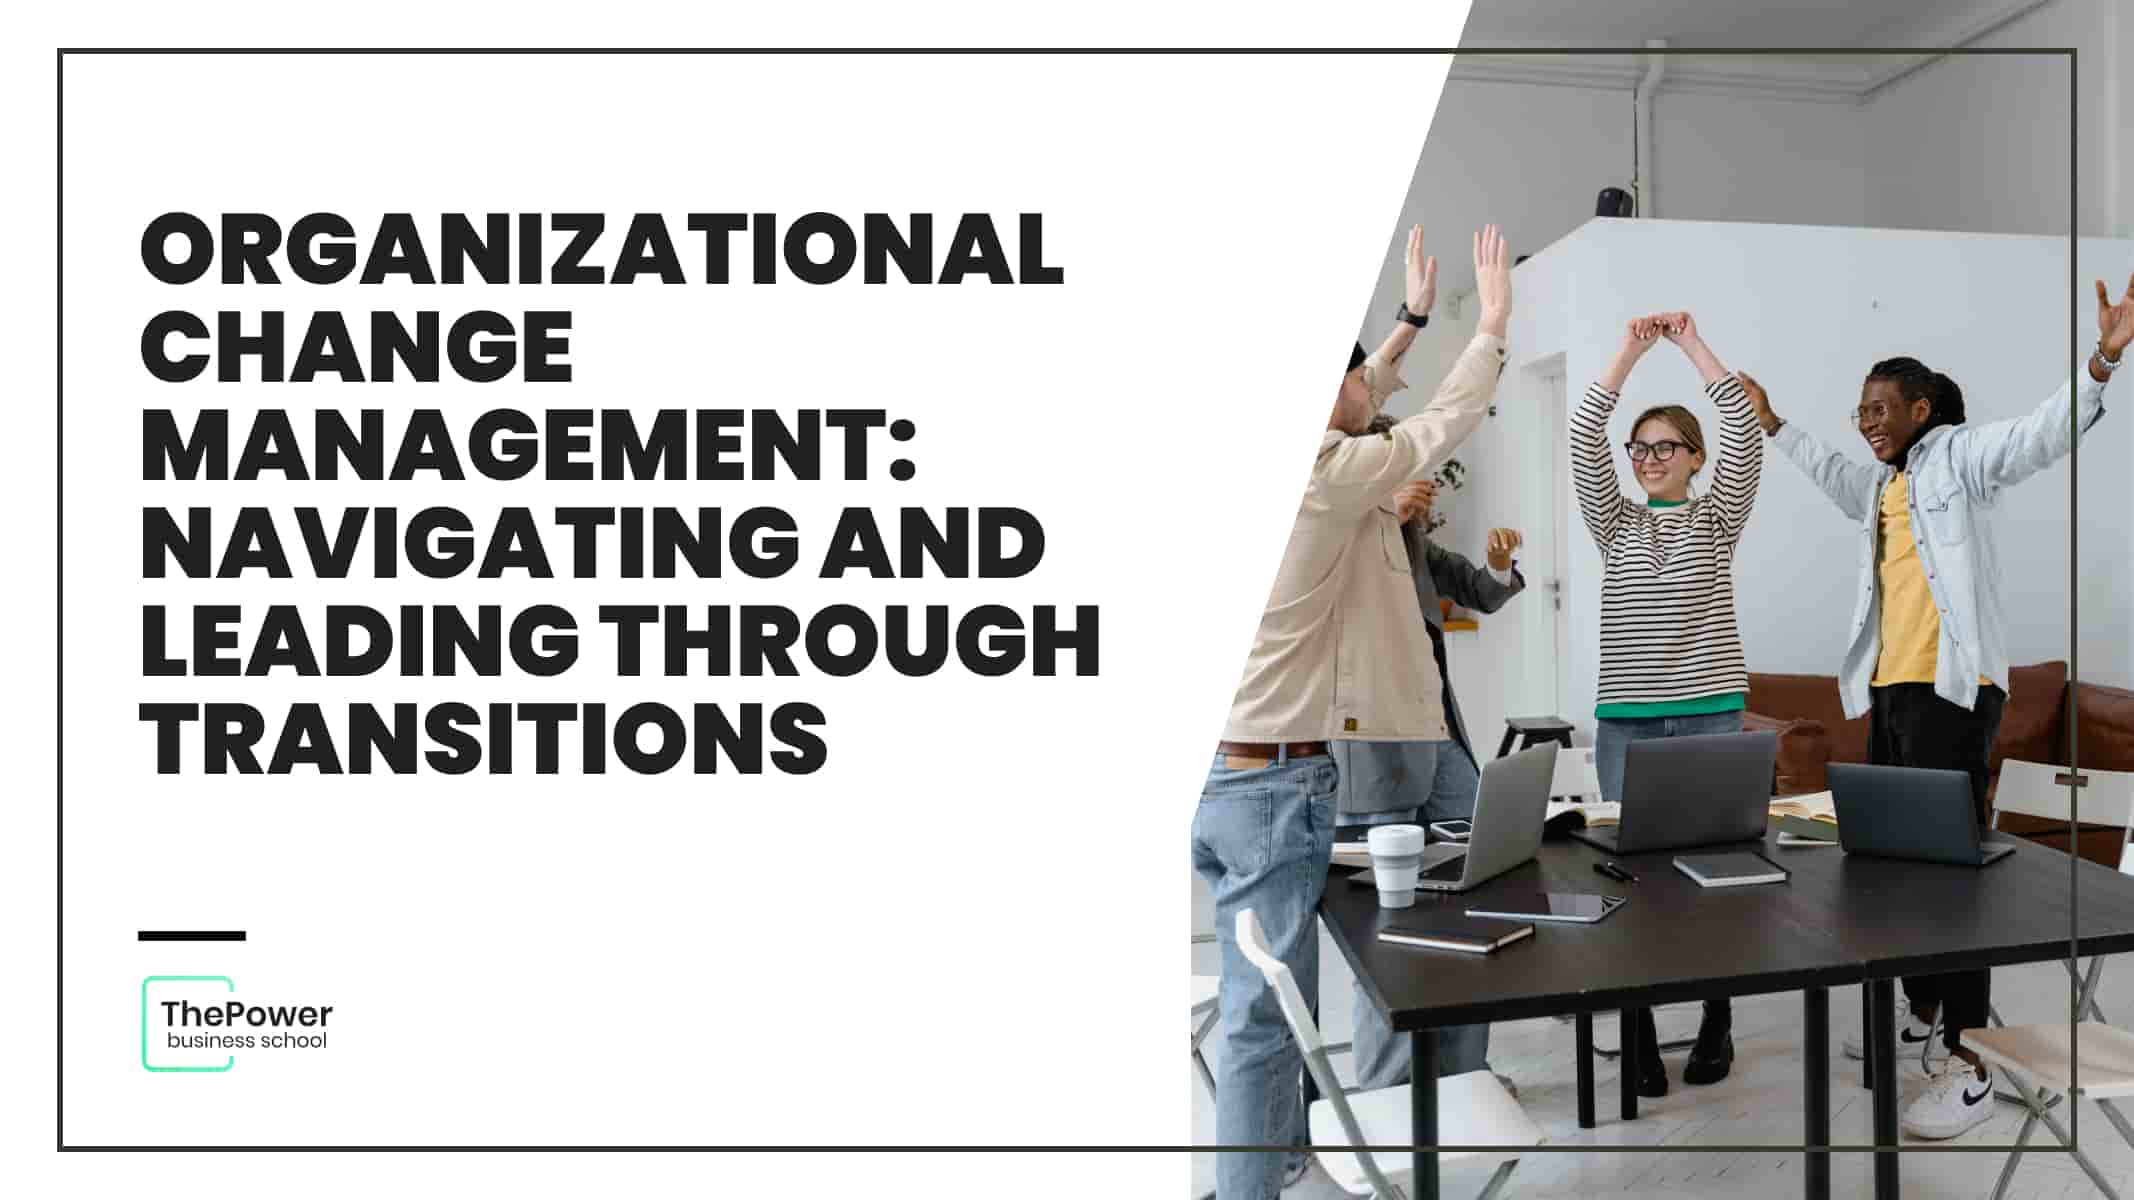 Organizational Change Management: Navigating and Leading through Transitions